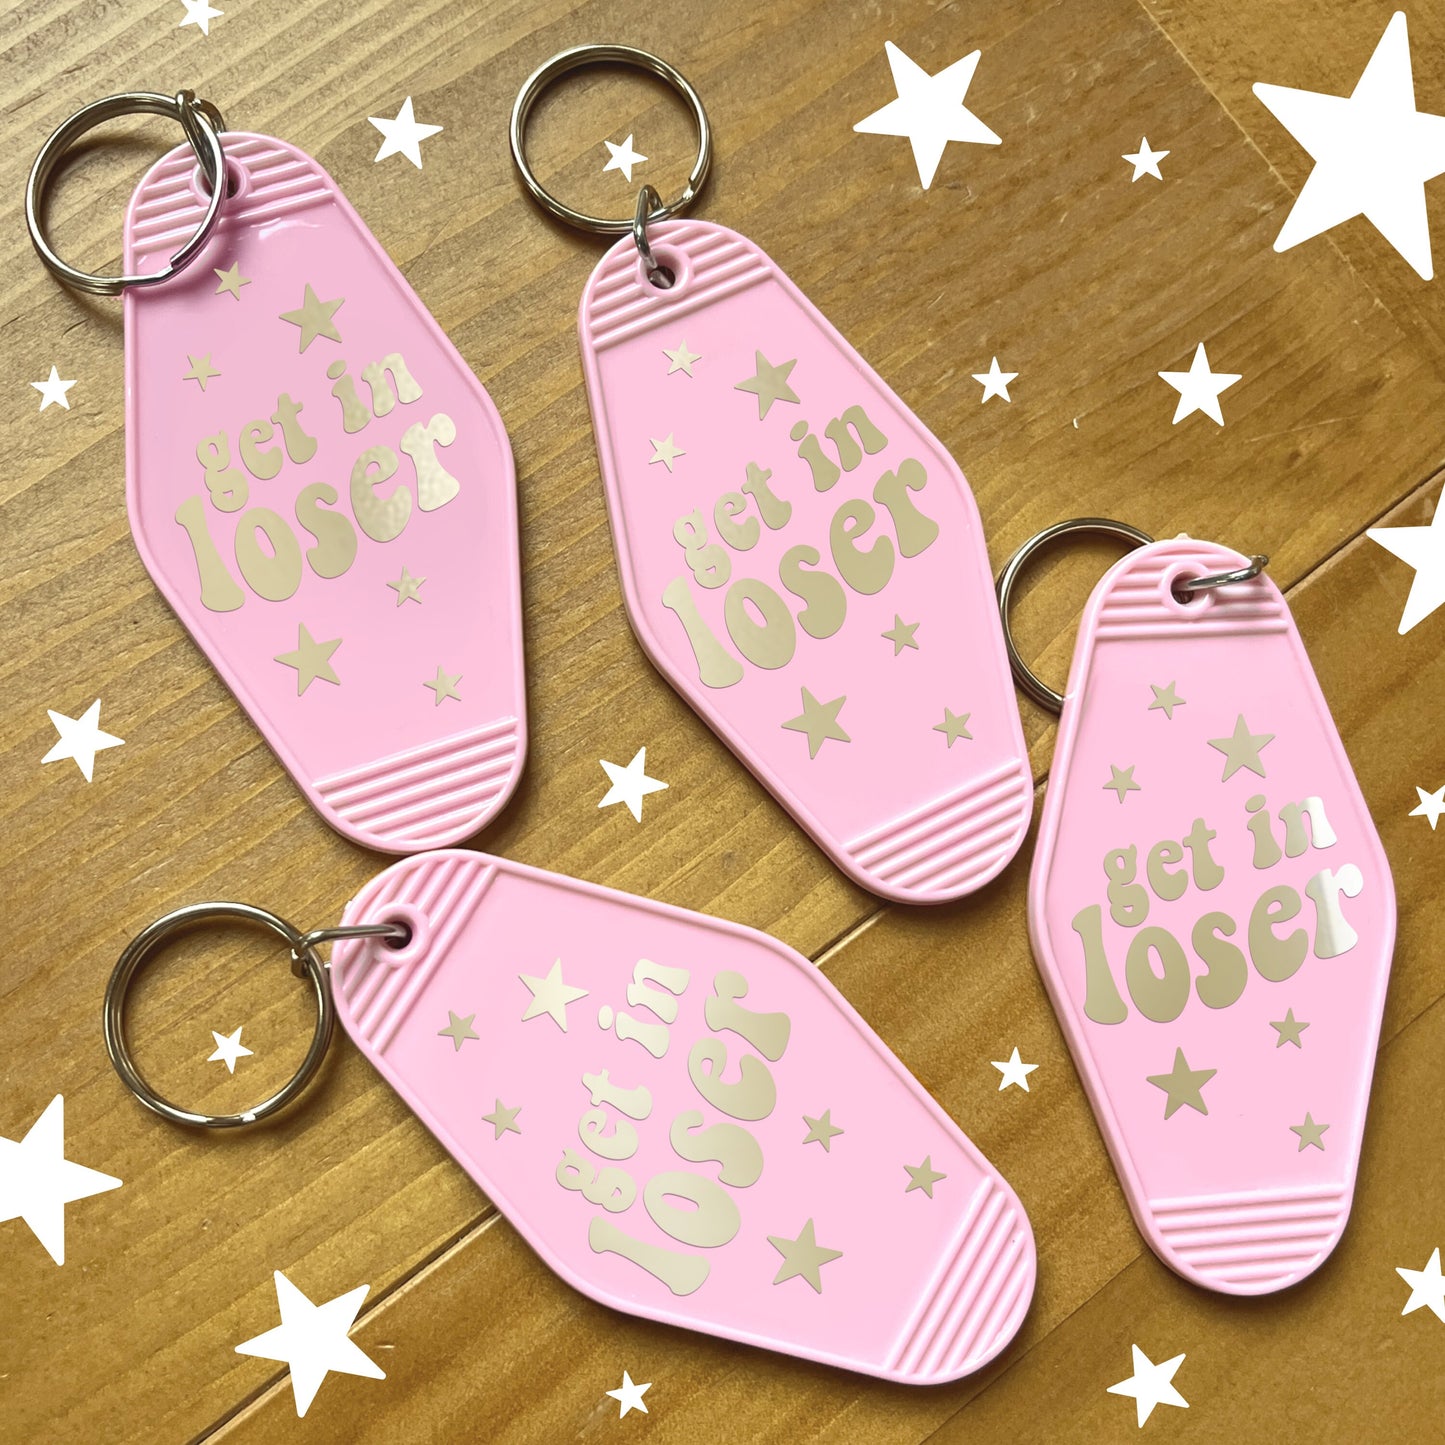 Get In Loser Keychain | Pink Motel Style Keychains, Passed Driving Test, Driving Test Gift, First Car Gift, Car Gift